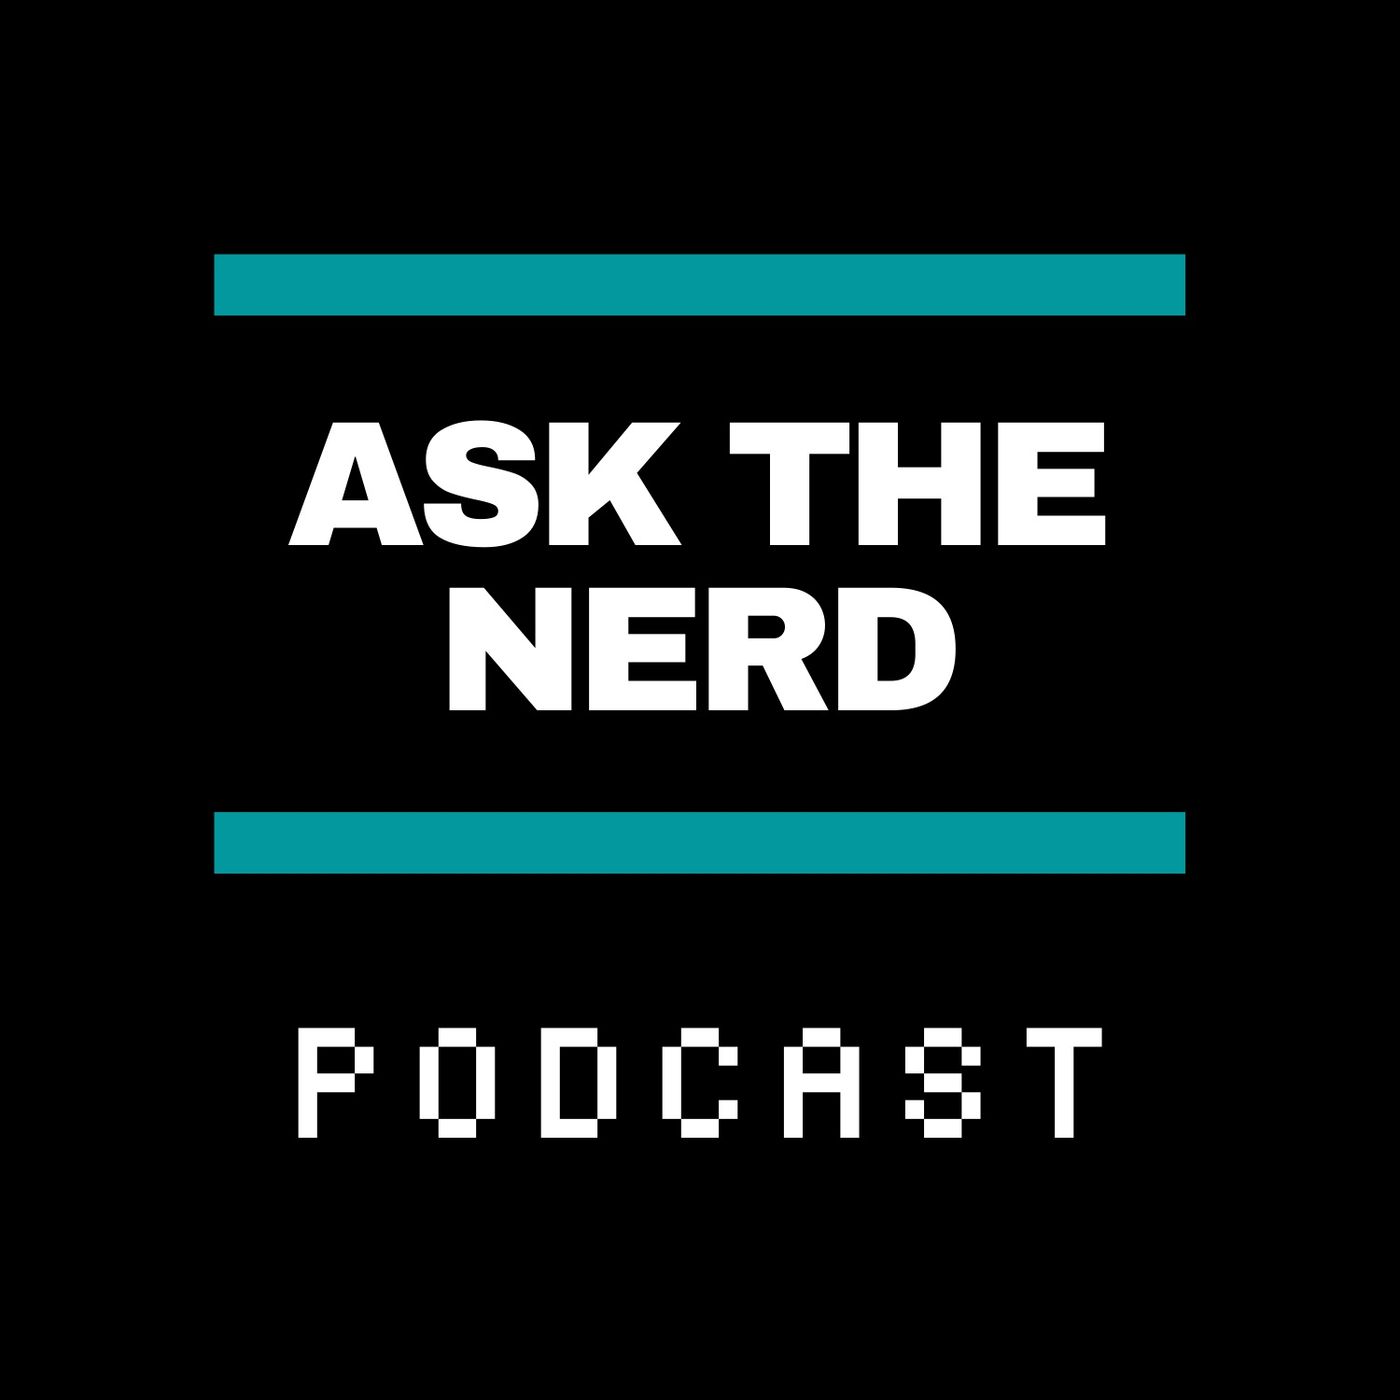 ChatGPT, AI, Google Bard & the Coming Future for Content Creators - Episode 45 - Ask the Nerd Podcast